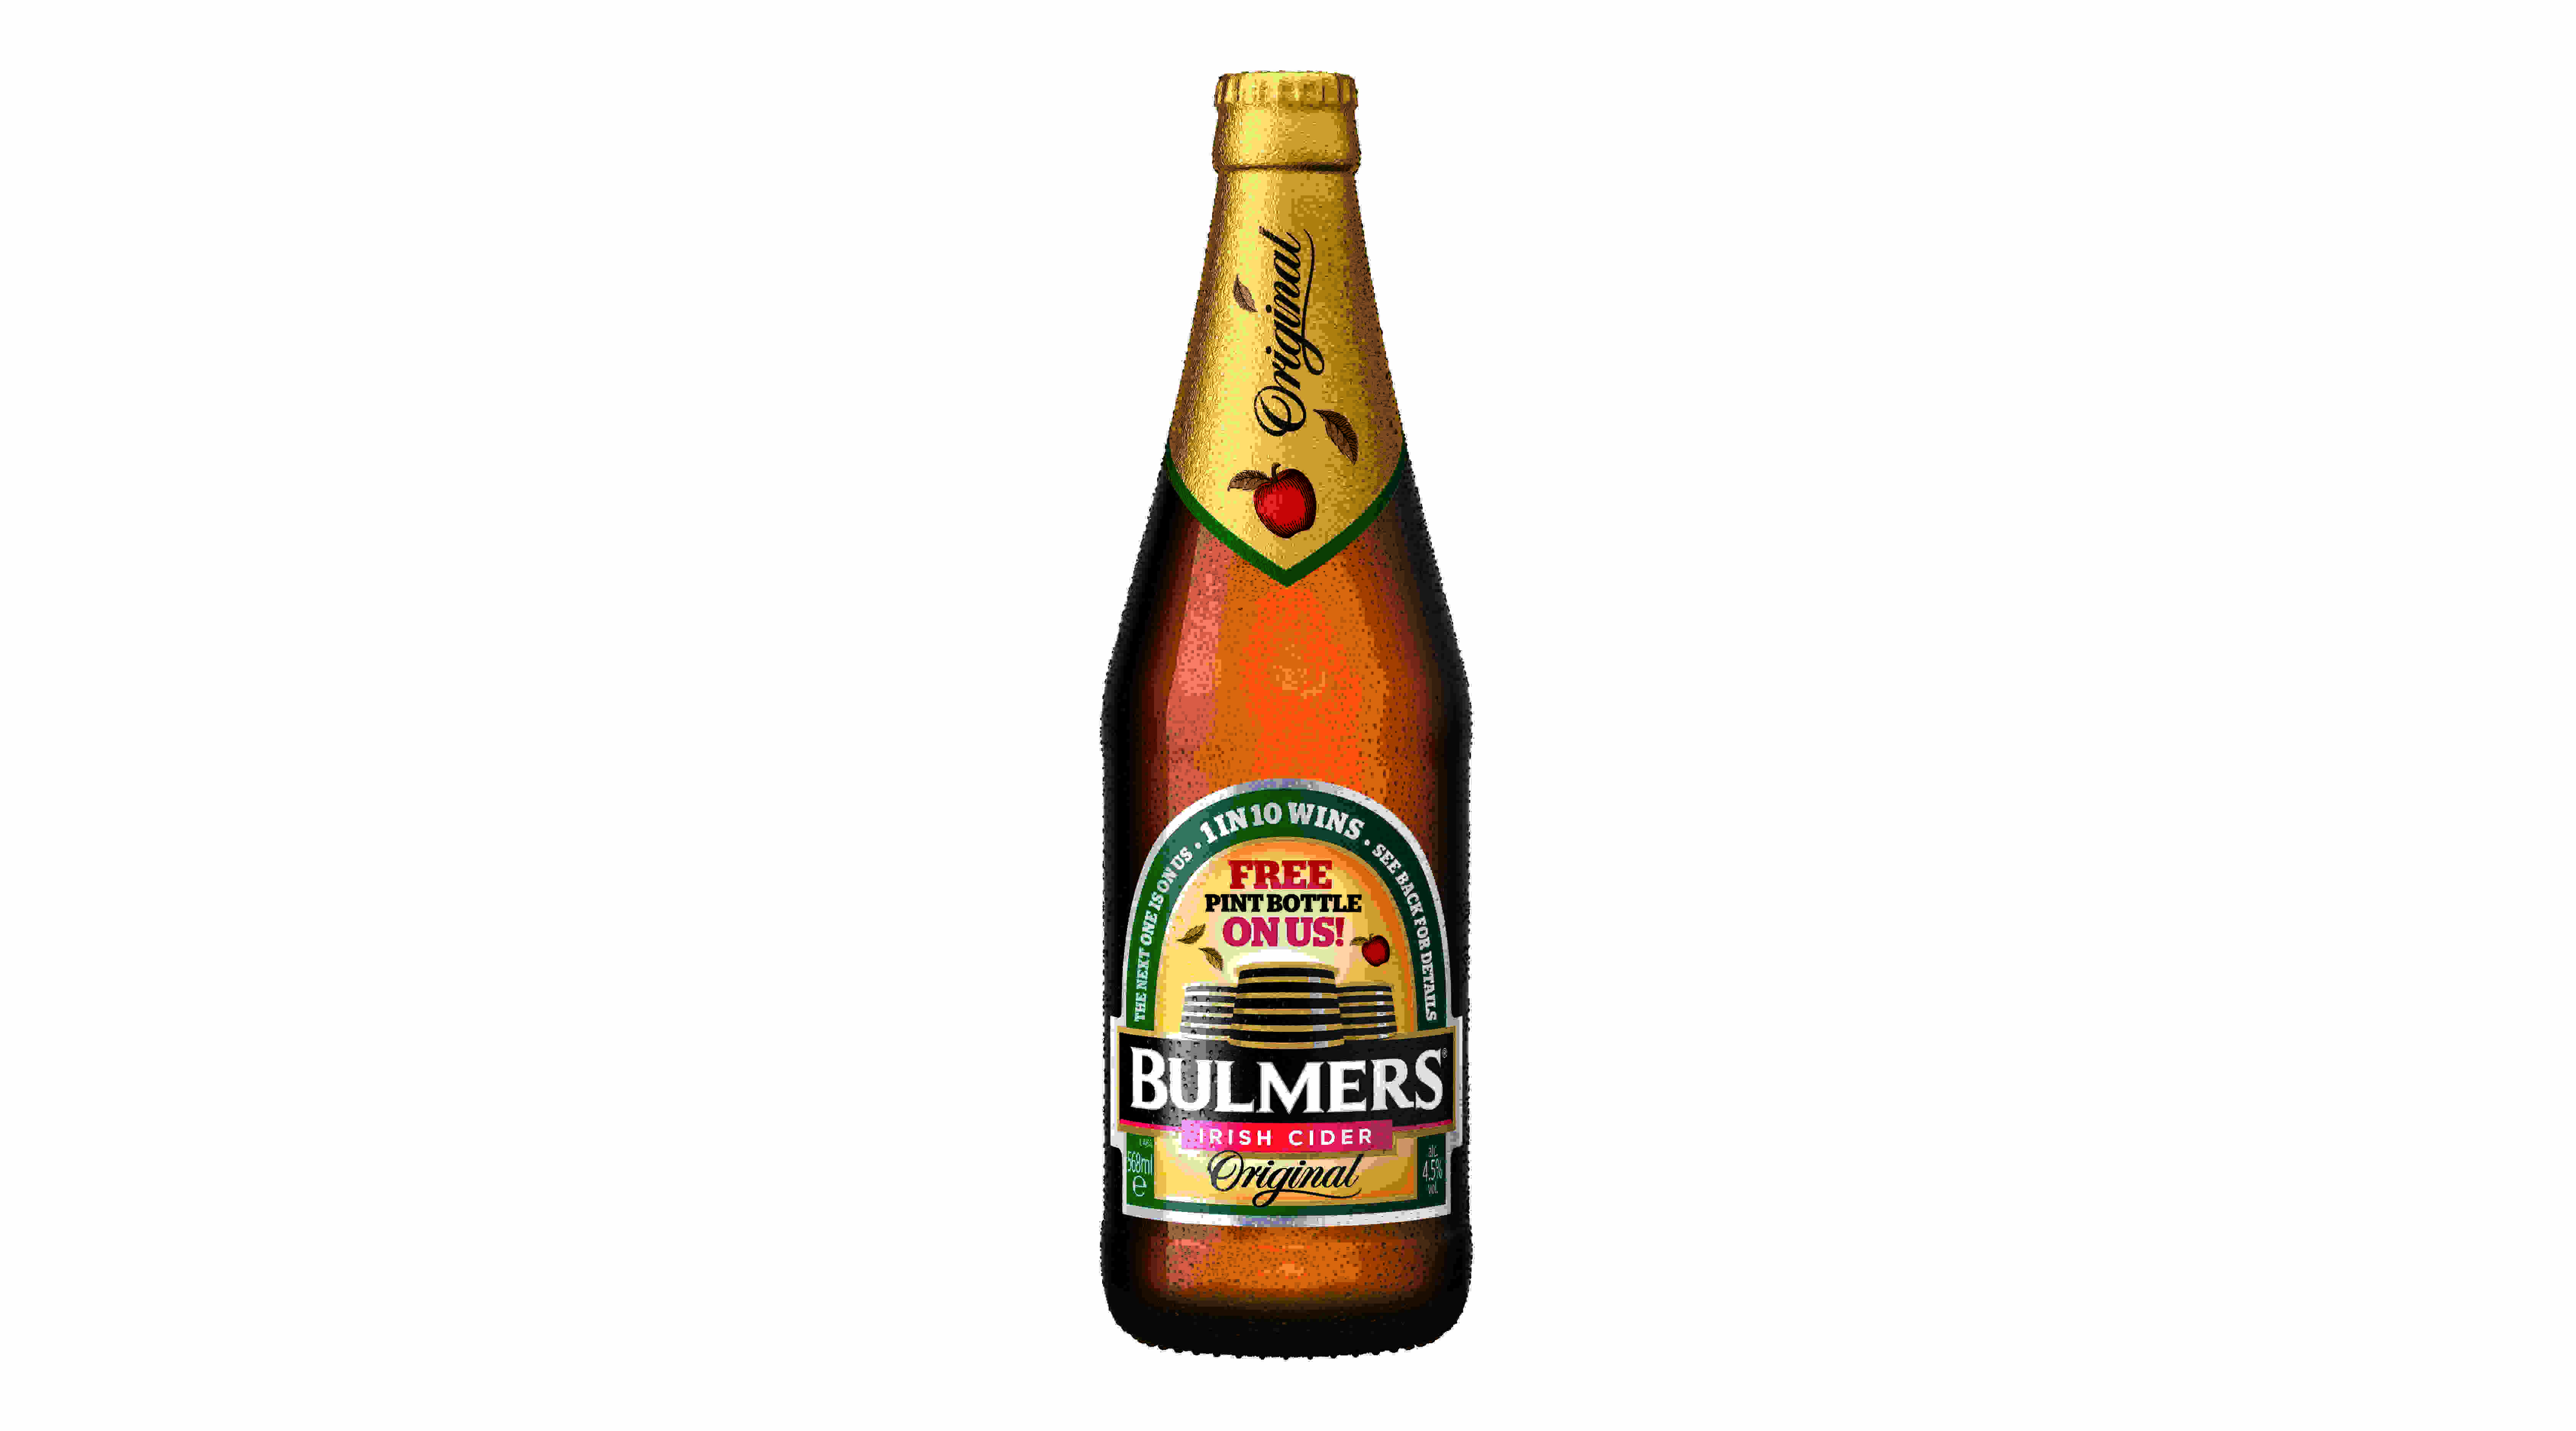 Bulmers off-trade volumes were up 42.4% in the six months to the end of August against the same period in 2019.